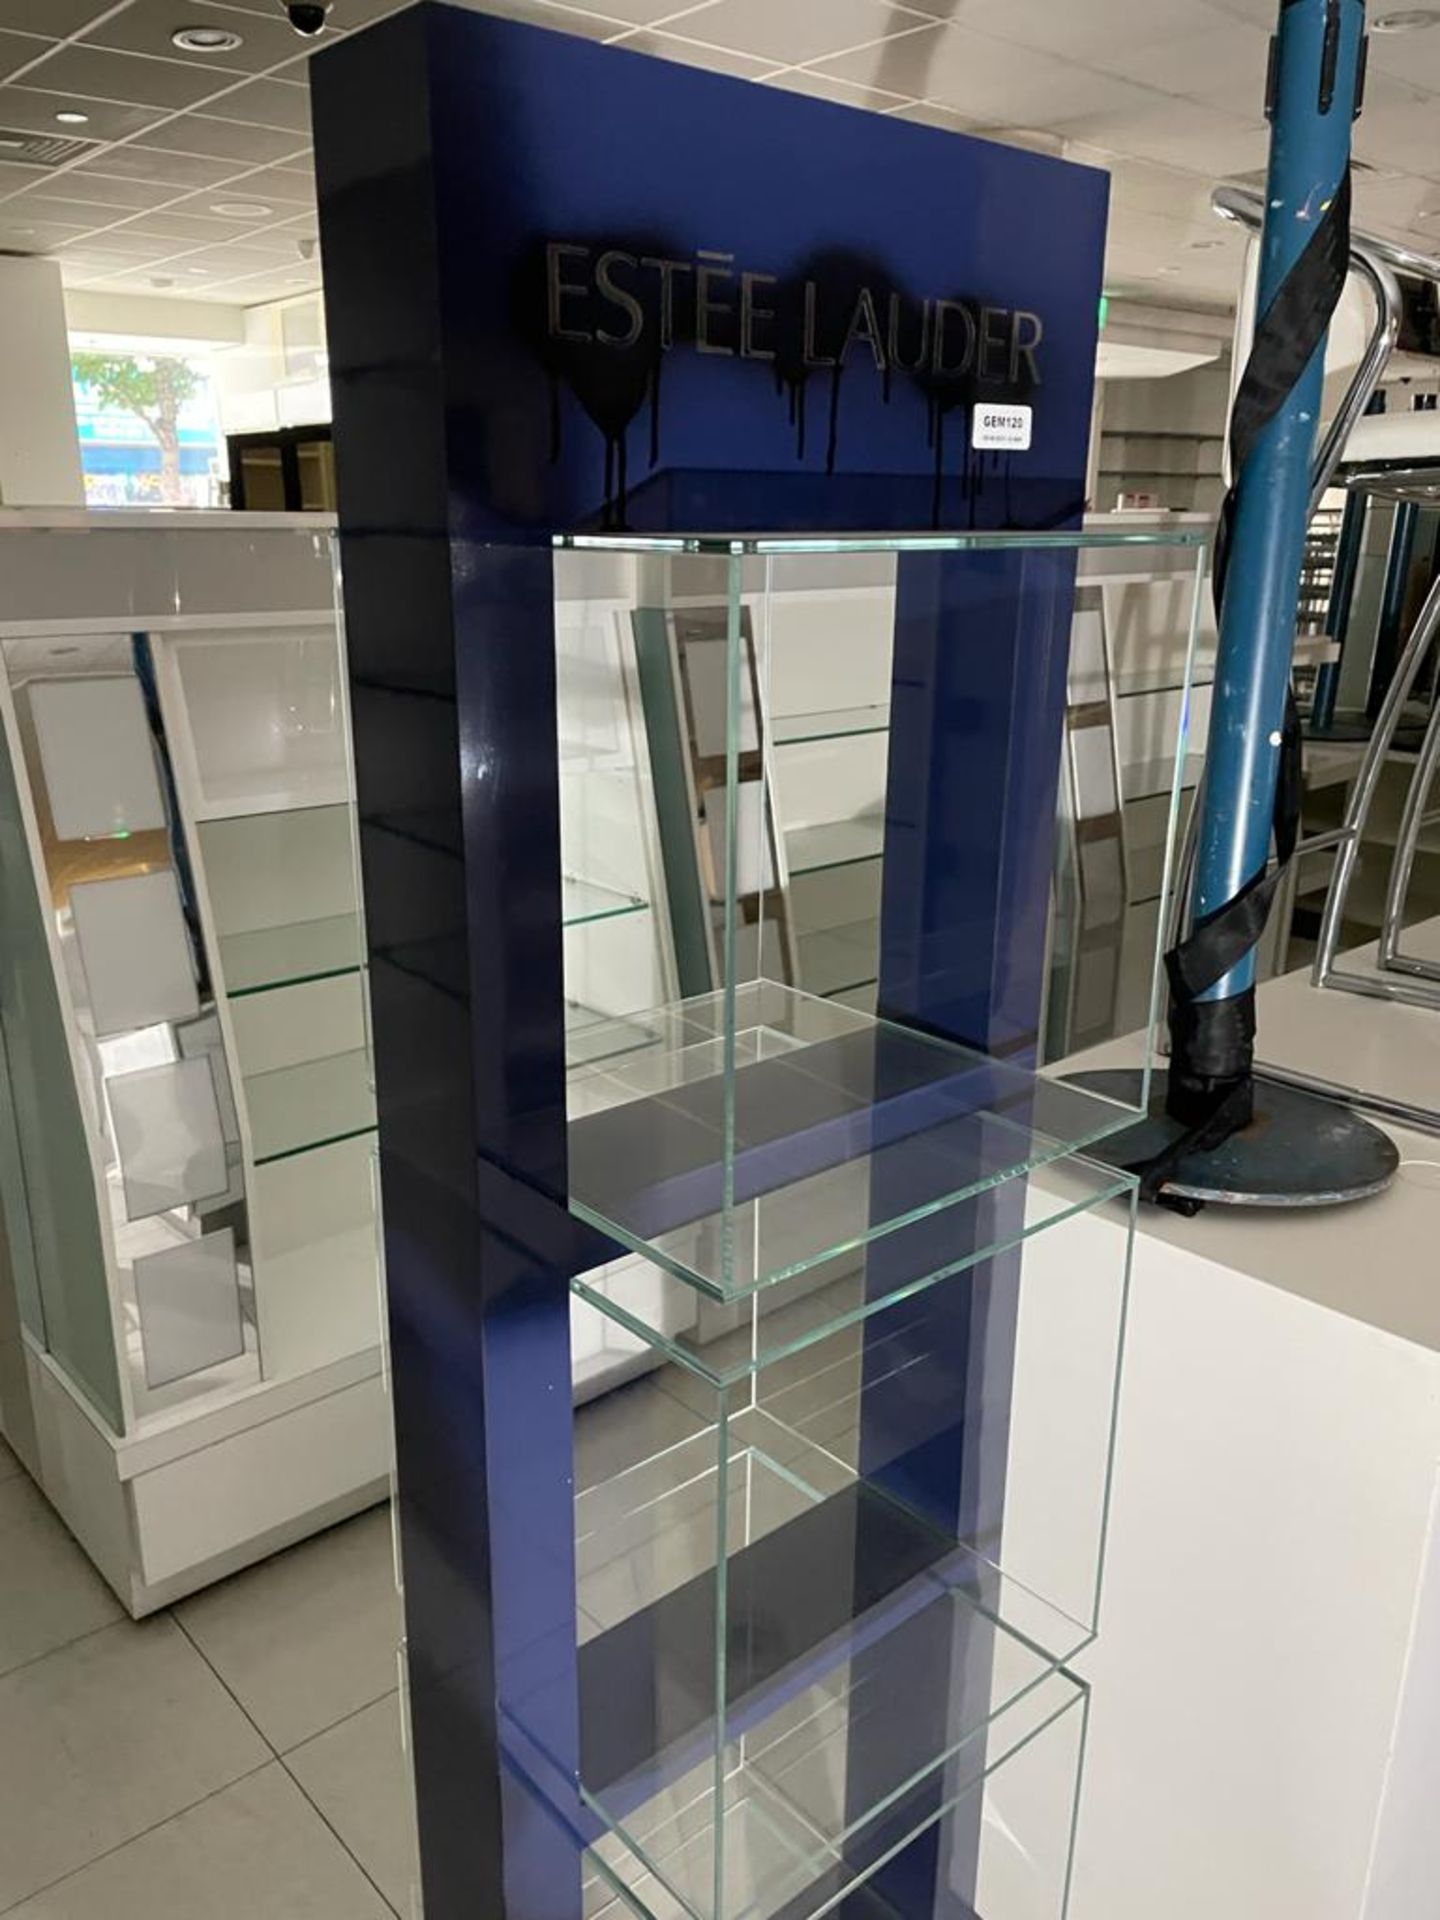 1 x Estee Lauder Free Standing Retail Display Unit With Glass Cube Display Shelves - Size H175 x W49 - Image 3 of 8